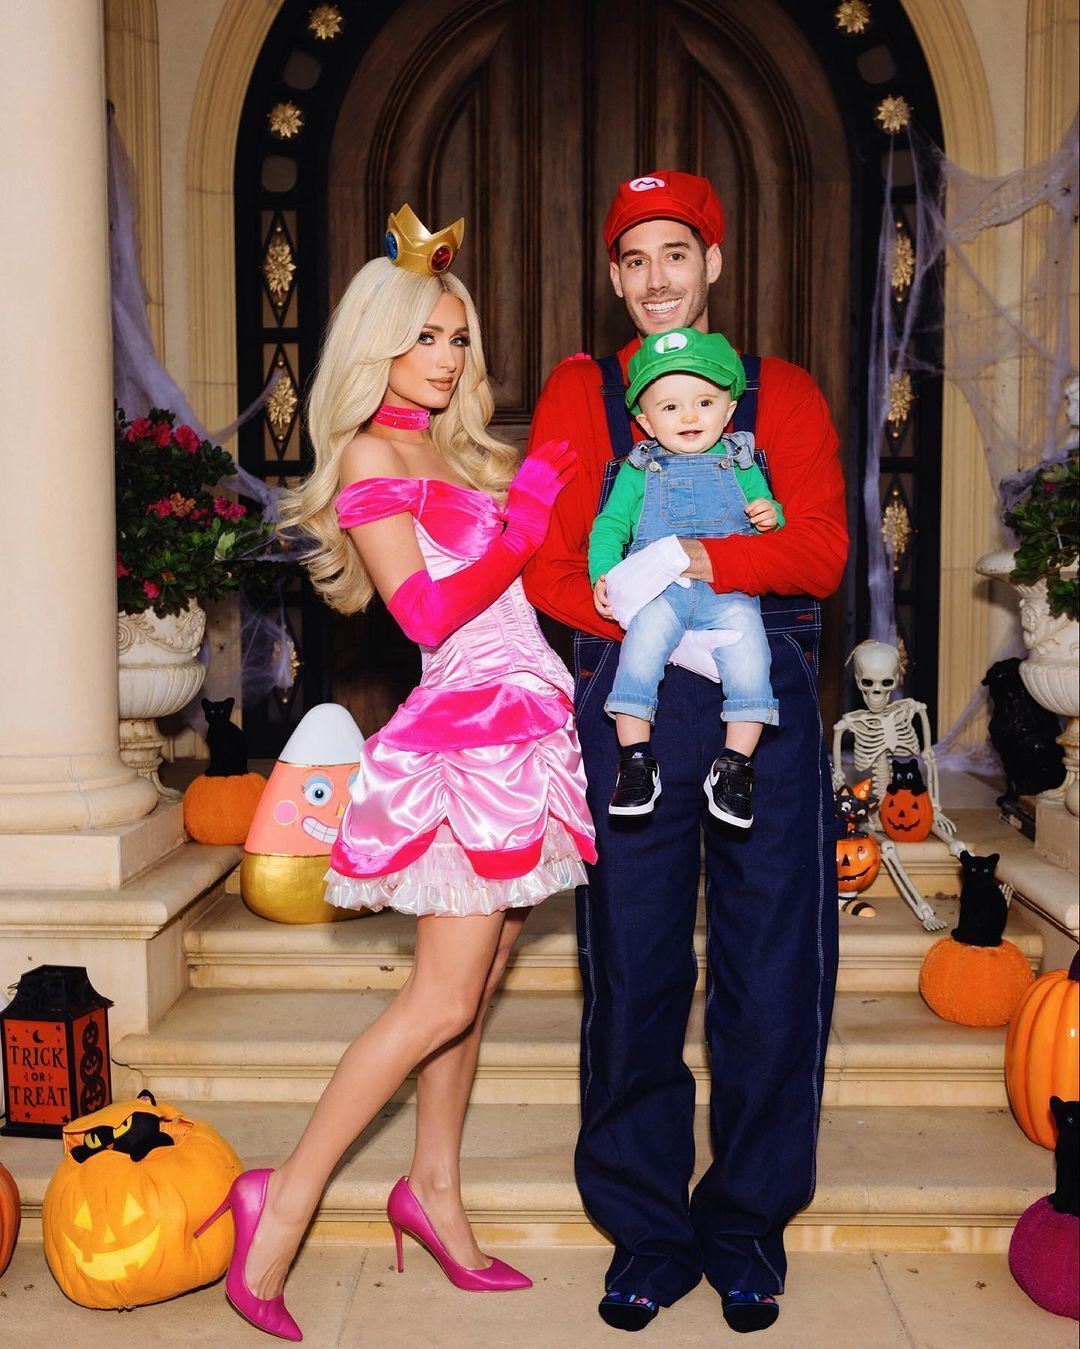 Paris Hilton tells for the first time why her children were born to a surrogate mother